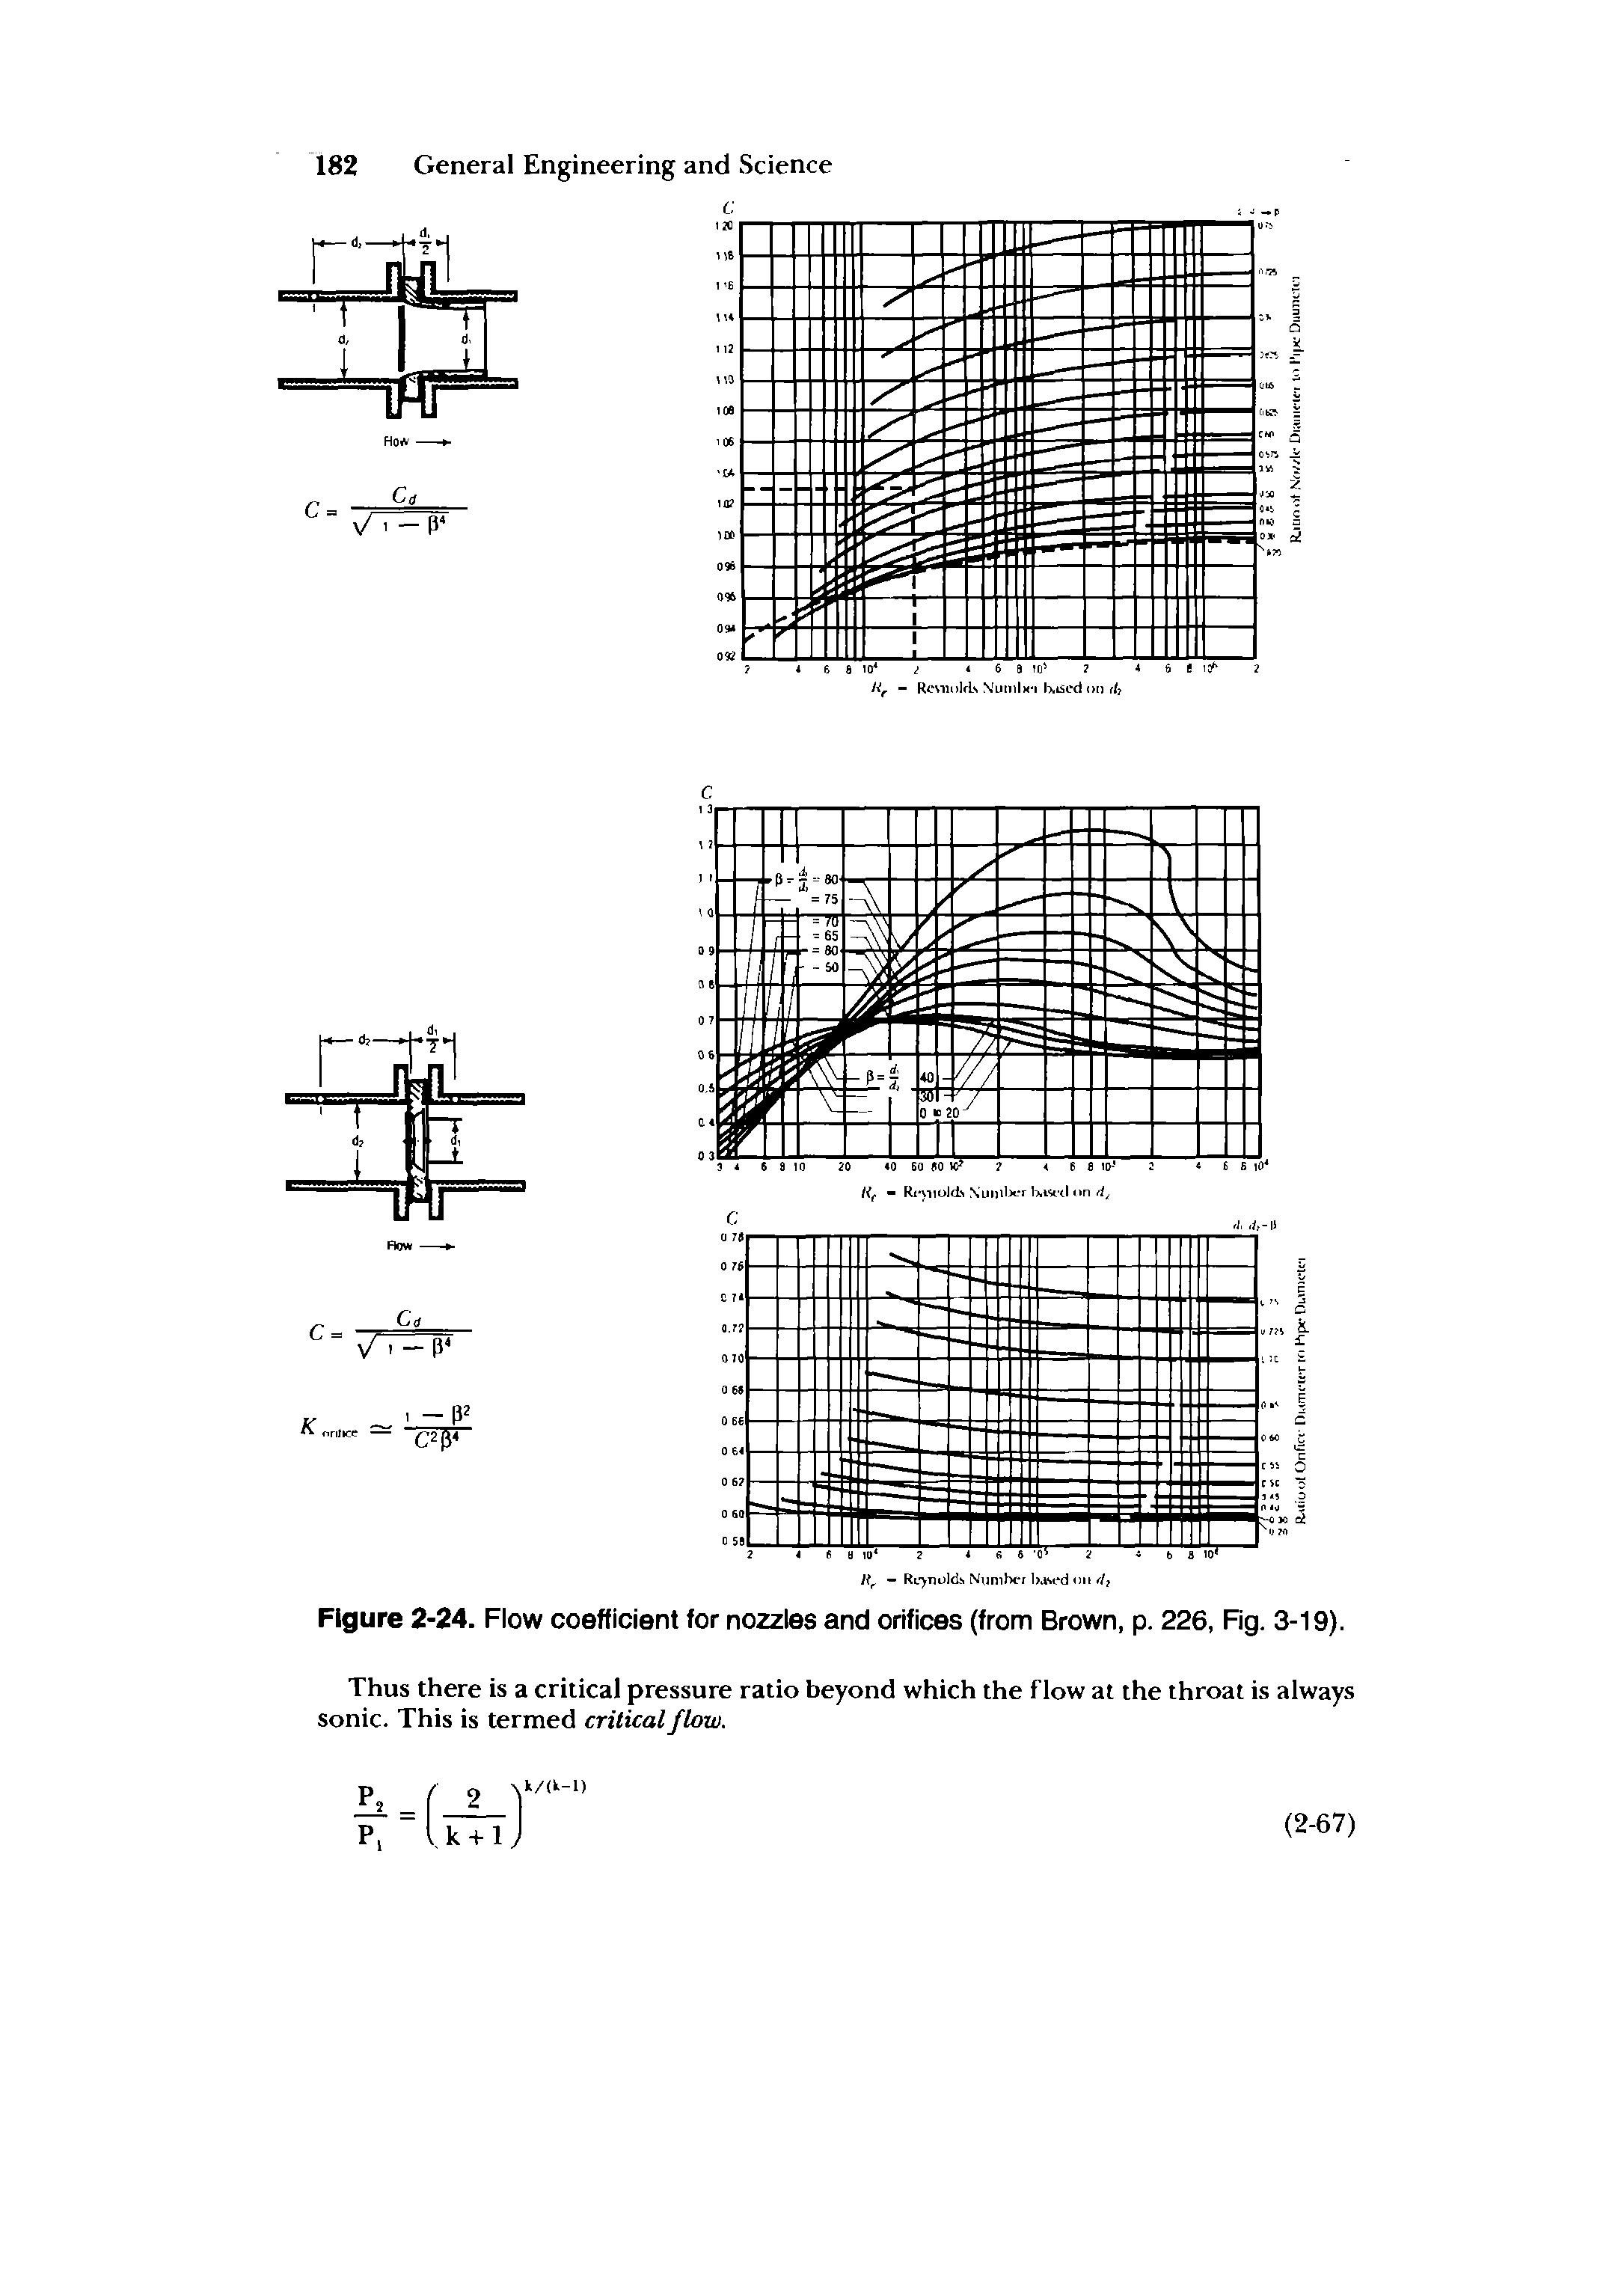 Figure 2-24. Flow coefficient for nozzles and orifices (from Brown, p. 226, Fig. 3-19).